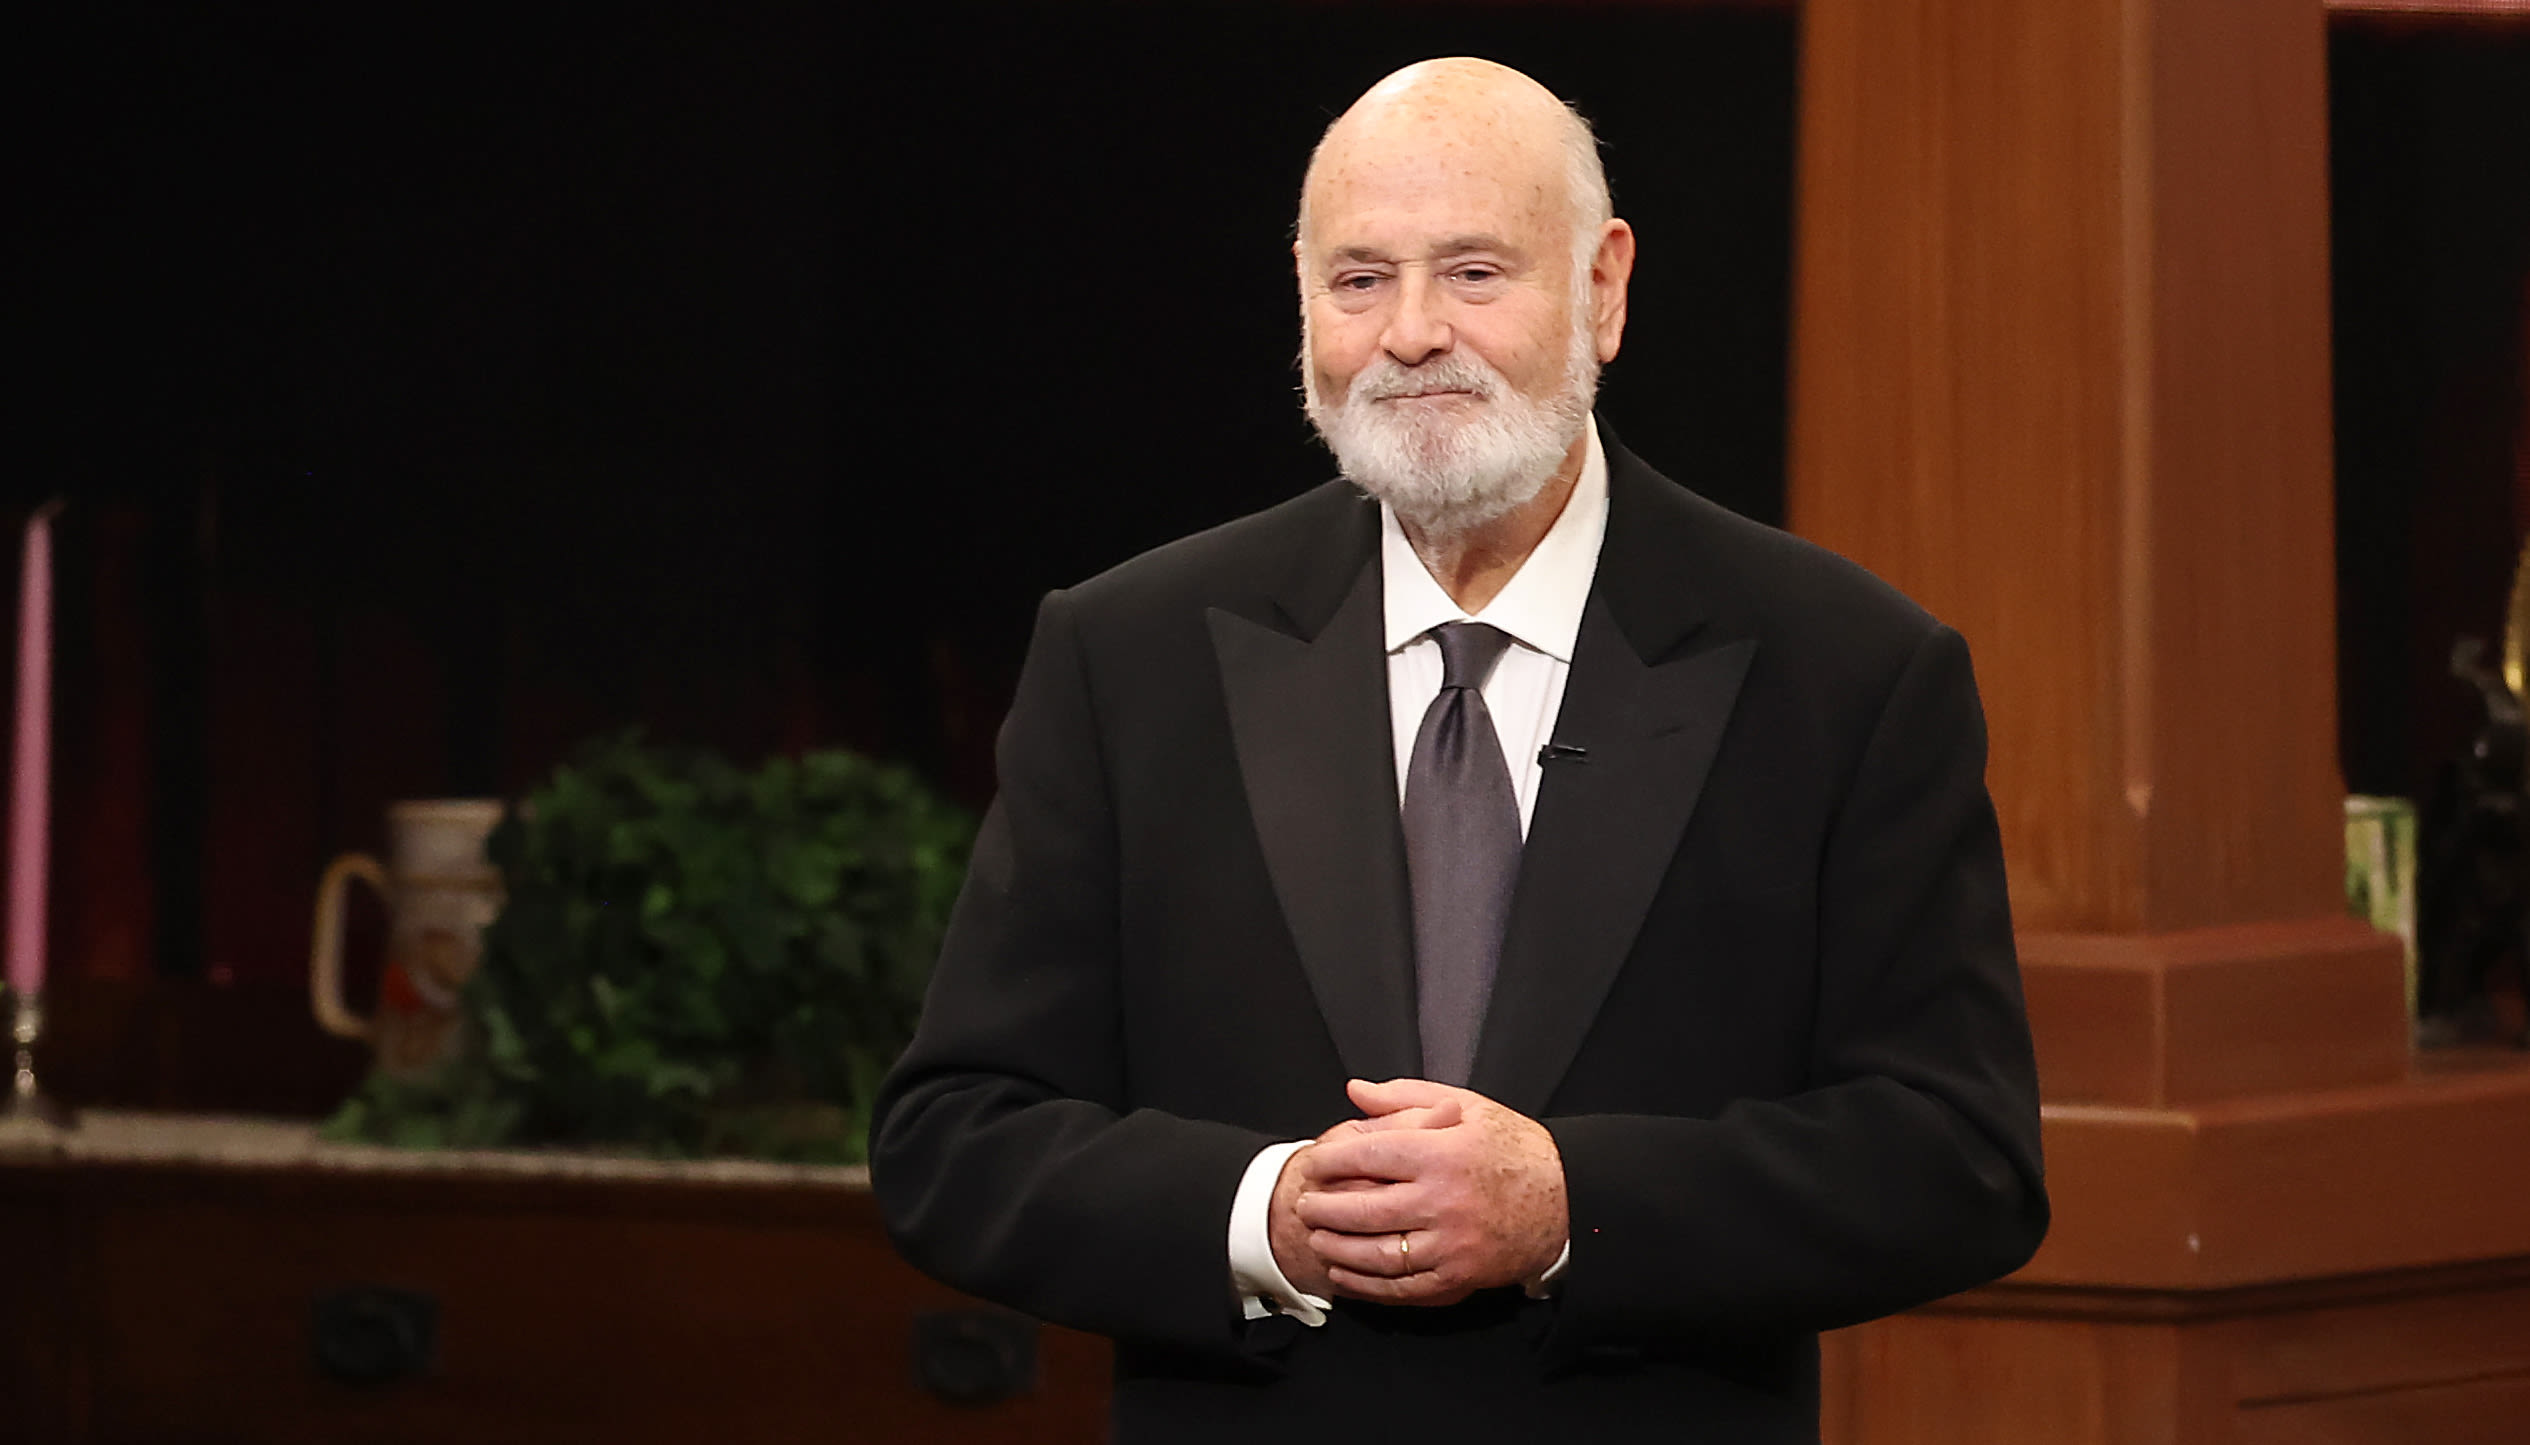 “Time To Stop F*cking Around”: Rob Reiner Joins Major Donors Calling For Joe Biden To Step Down